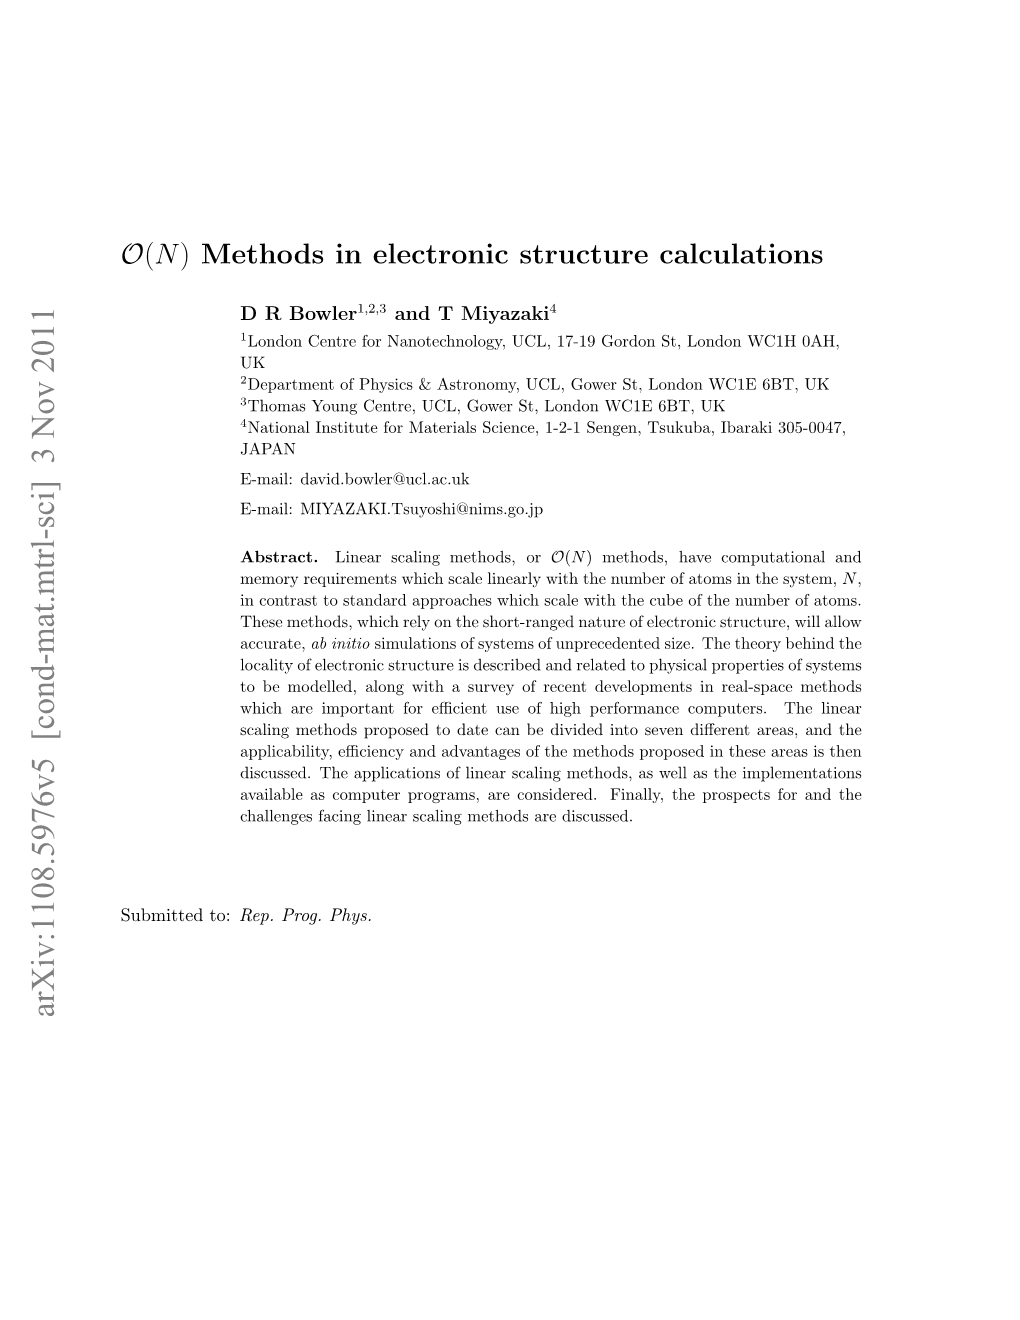 O (N) Methods in Electronic Structure Calculations